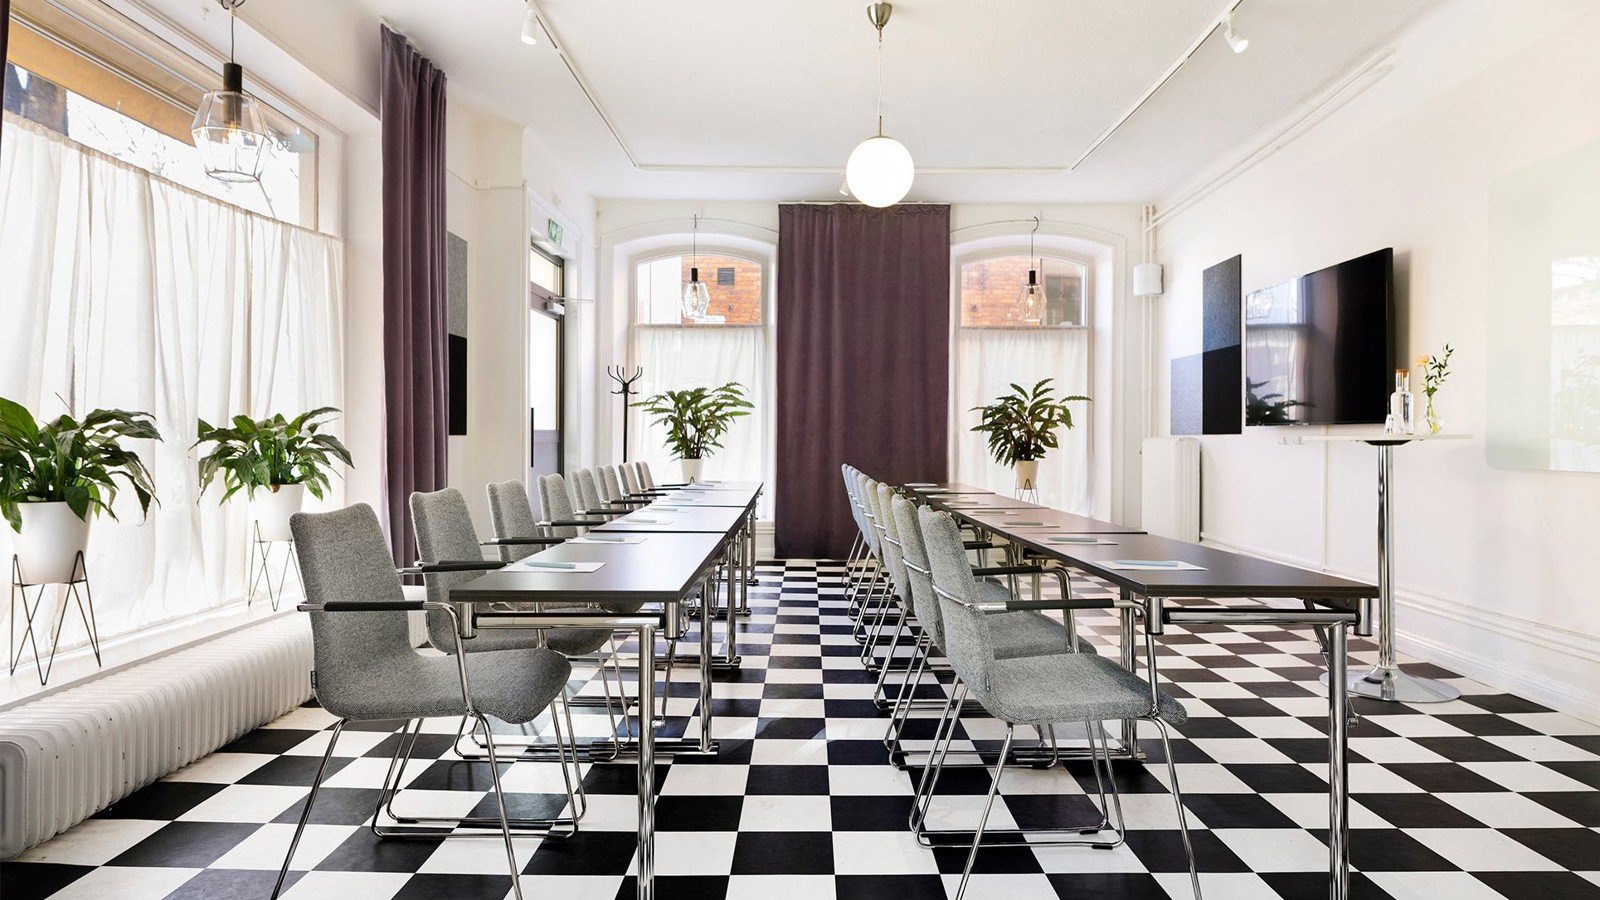 Conference room with checkerboard floor, chairs and large windows